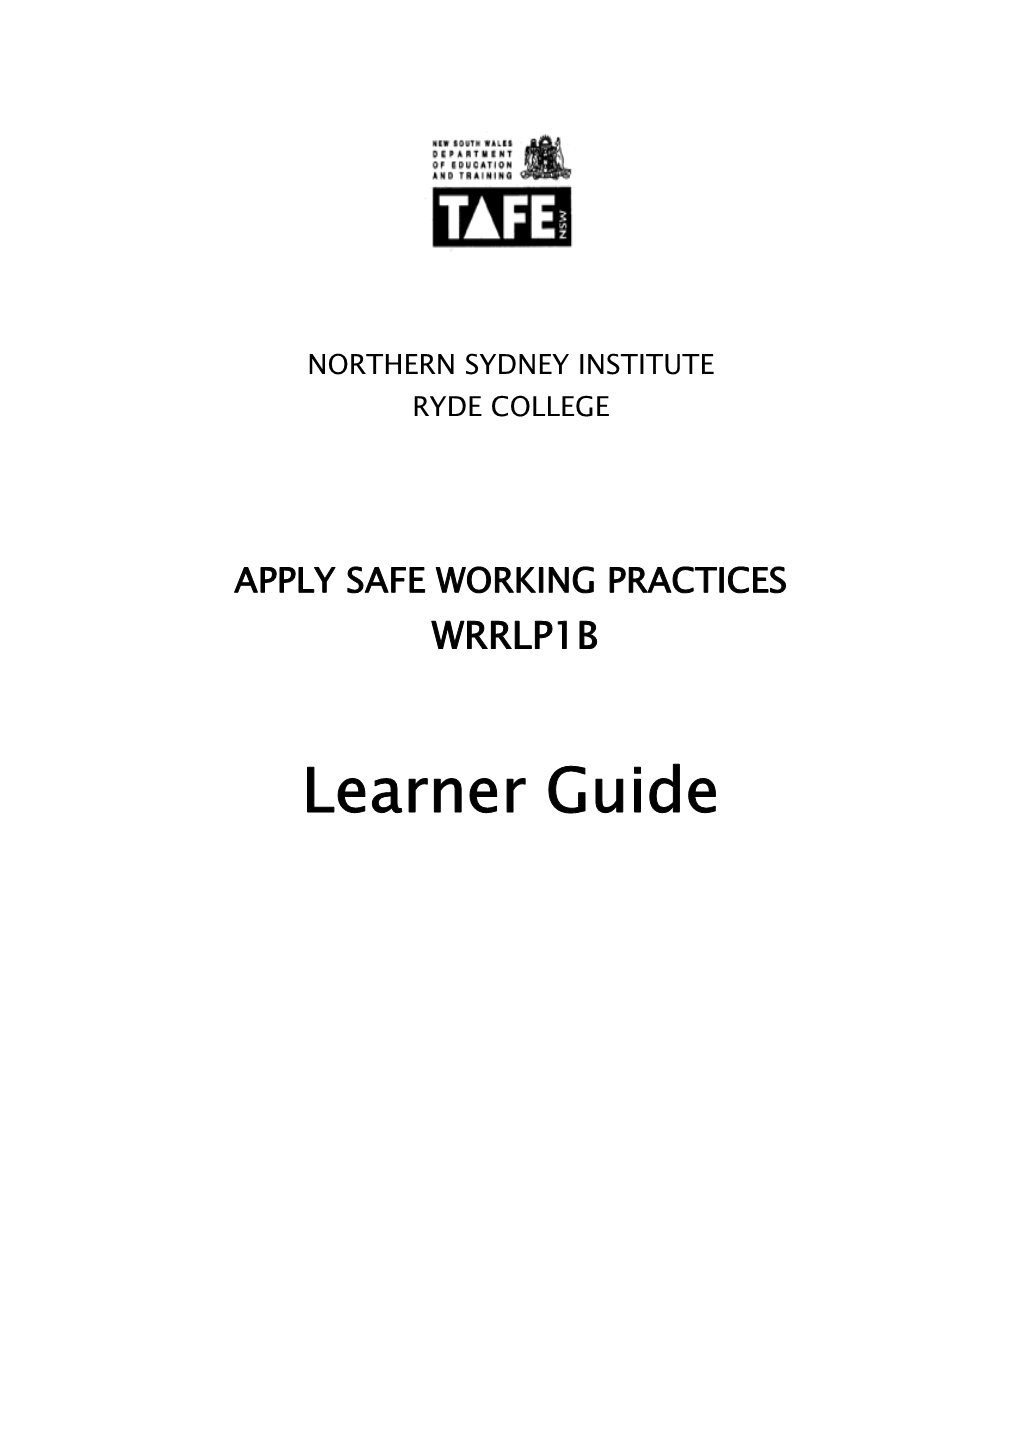 Apply Safe Working Practices